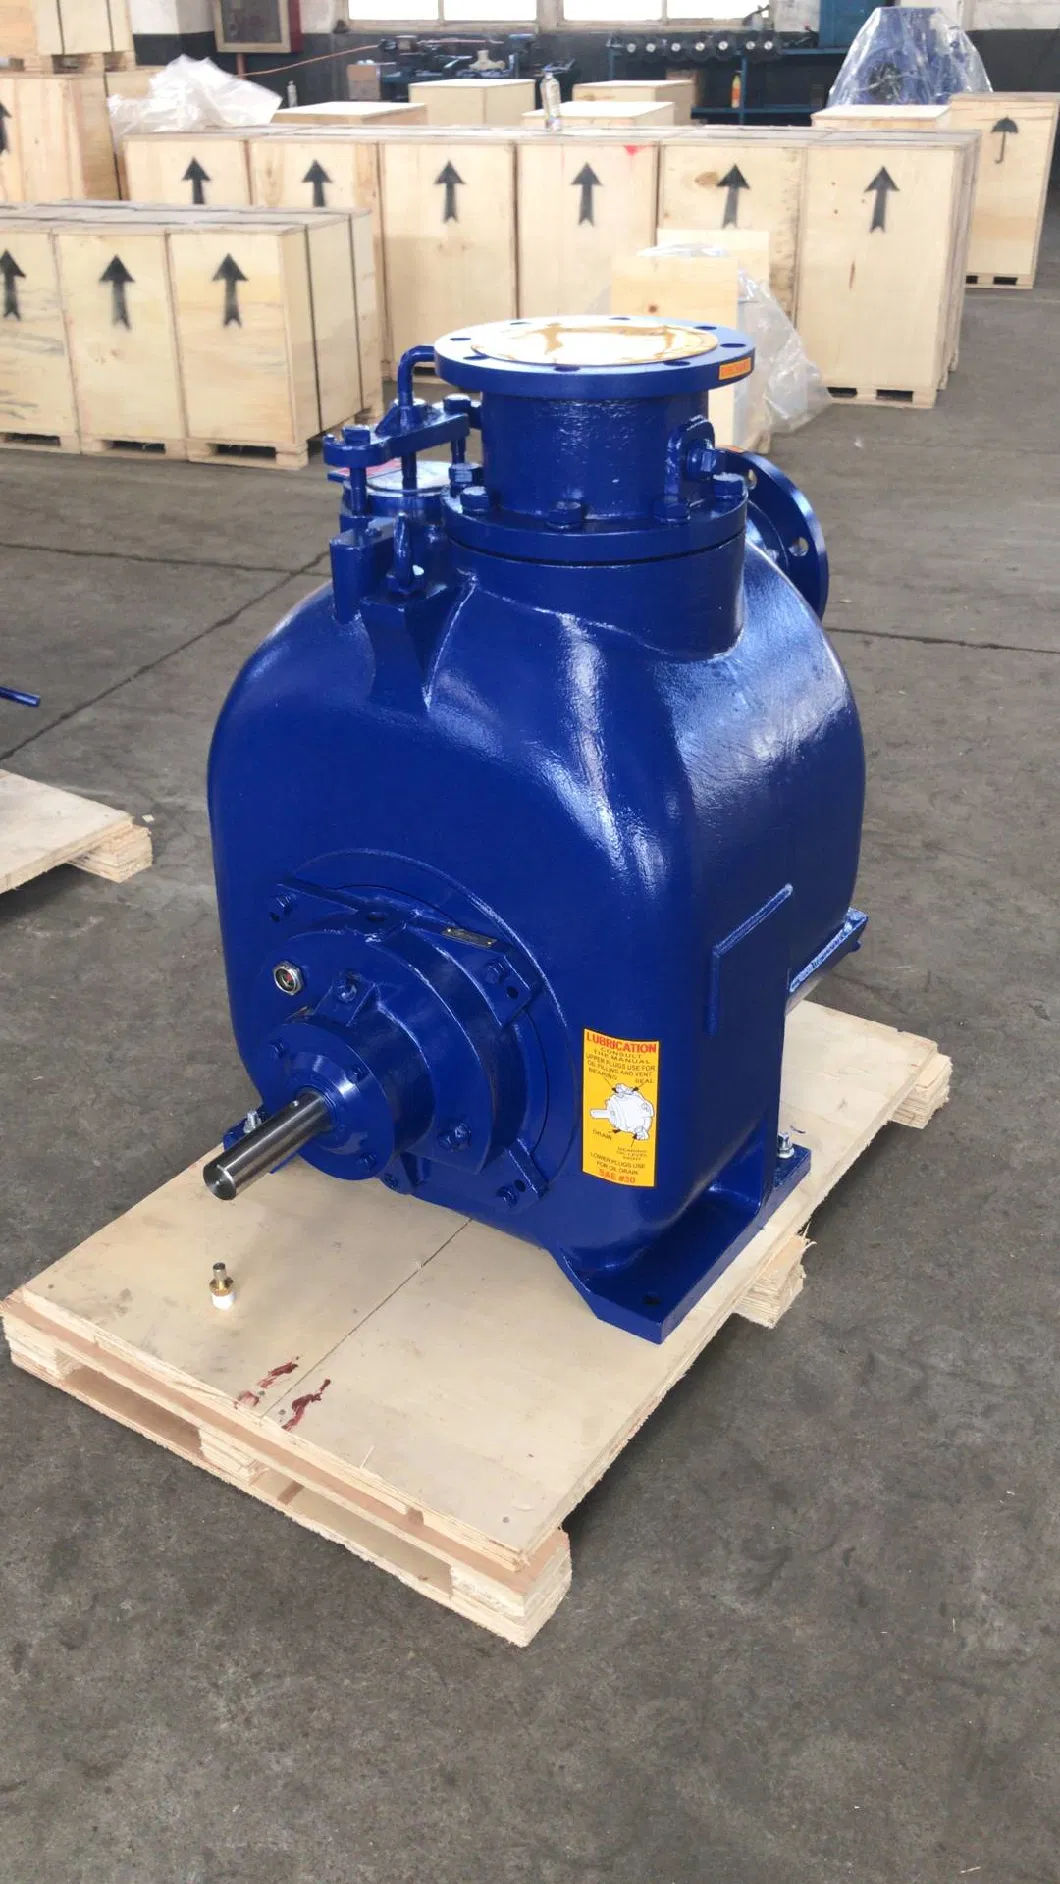 3-12 Inch Non-Clog Wastewater Transport and Flood Control Sewage Self-Priming Trash Pump